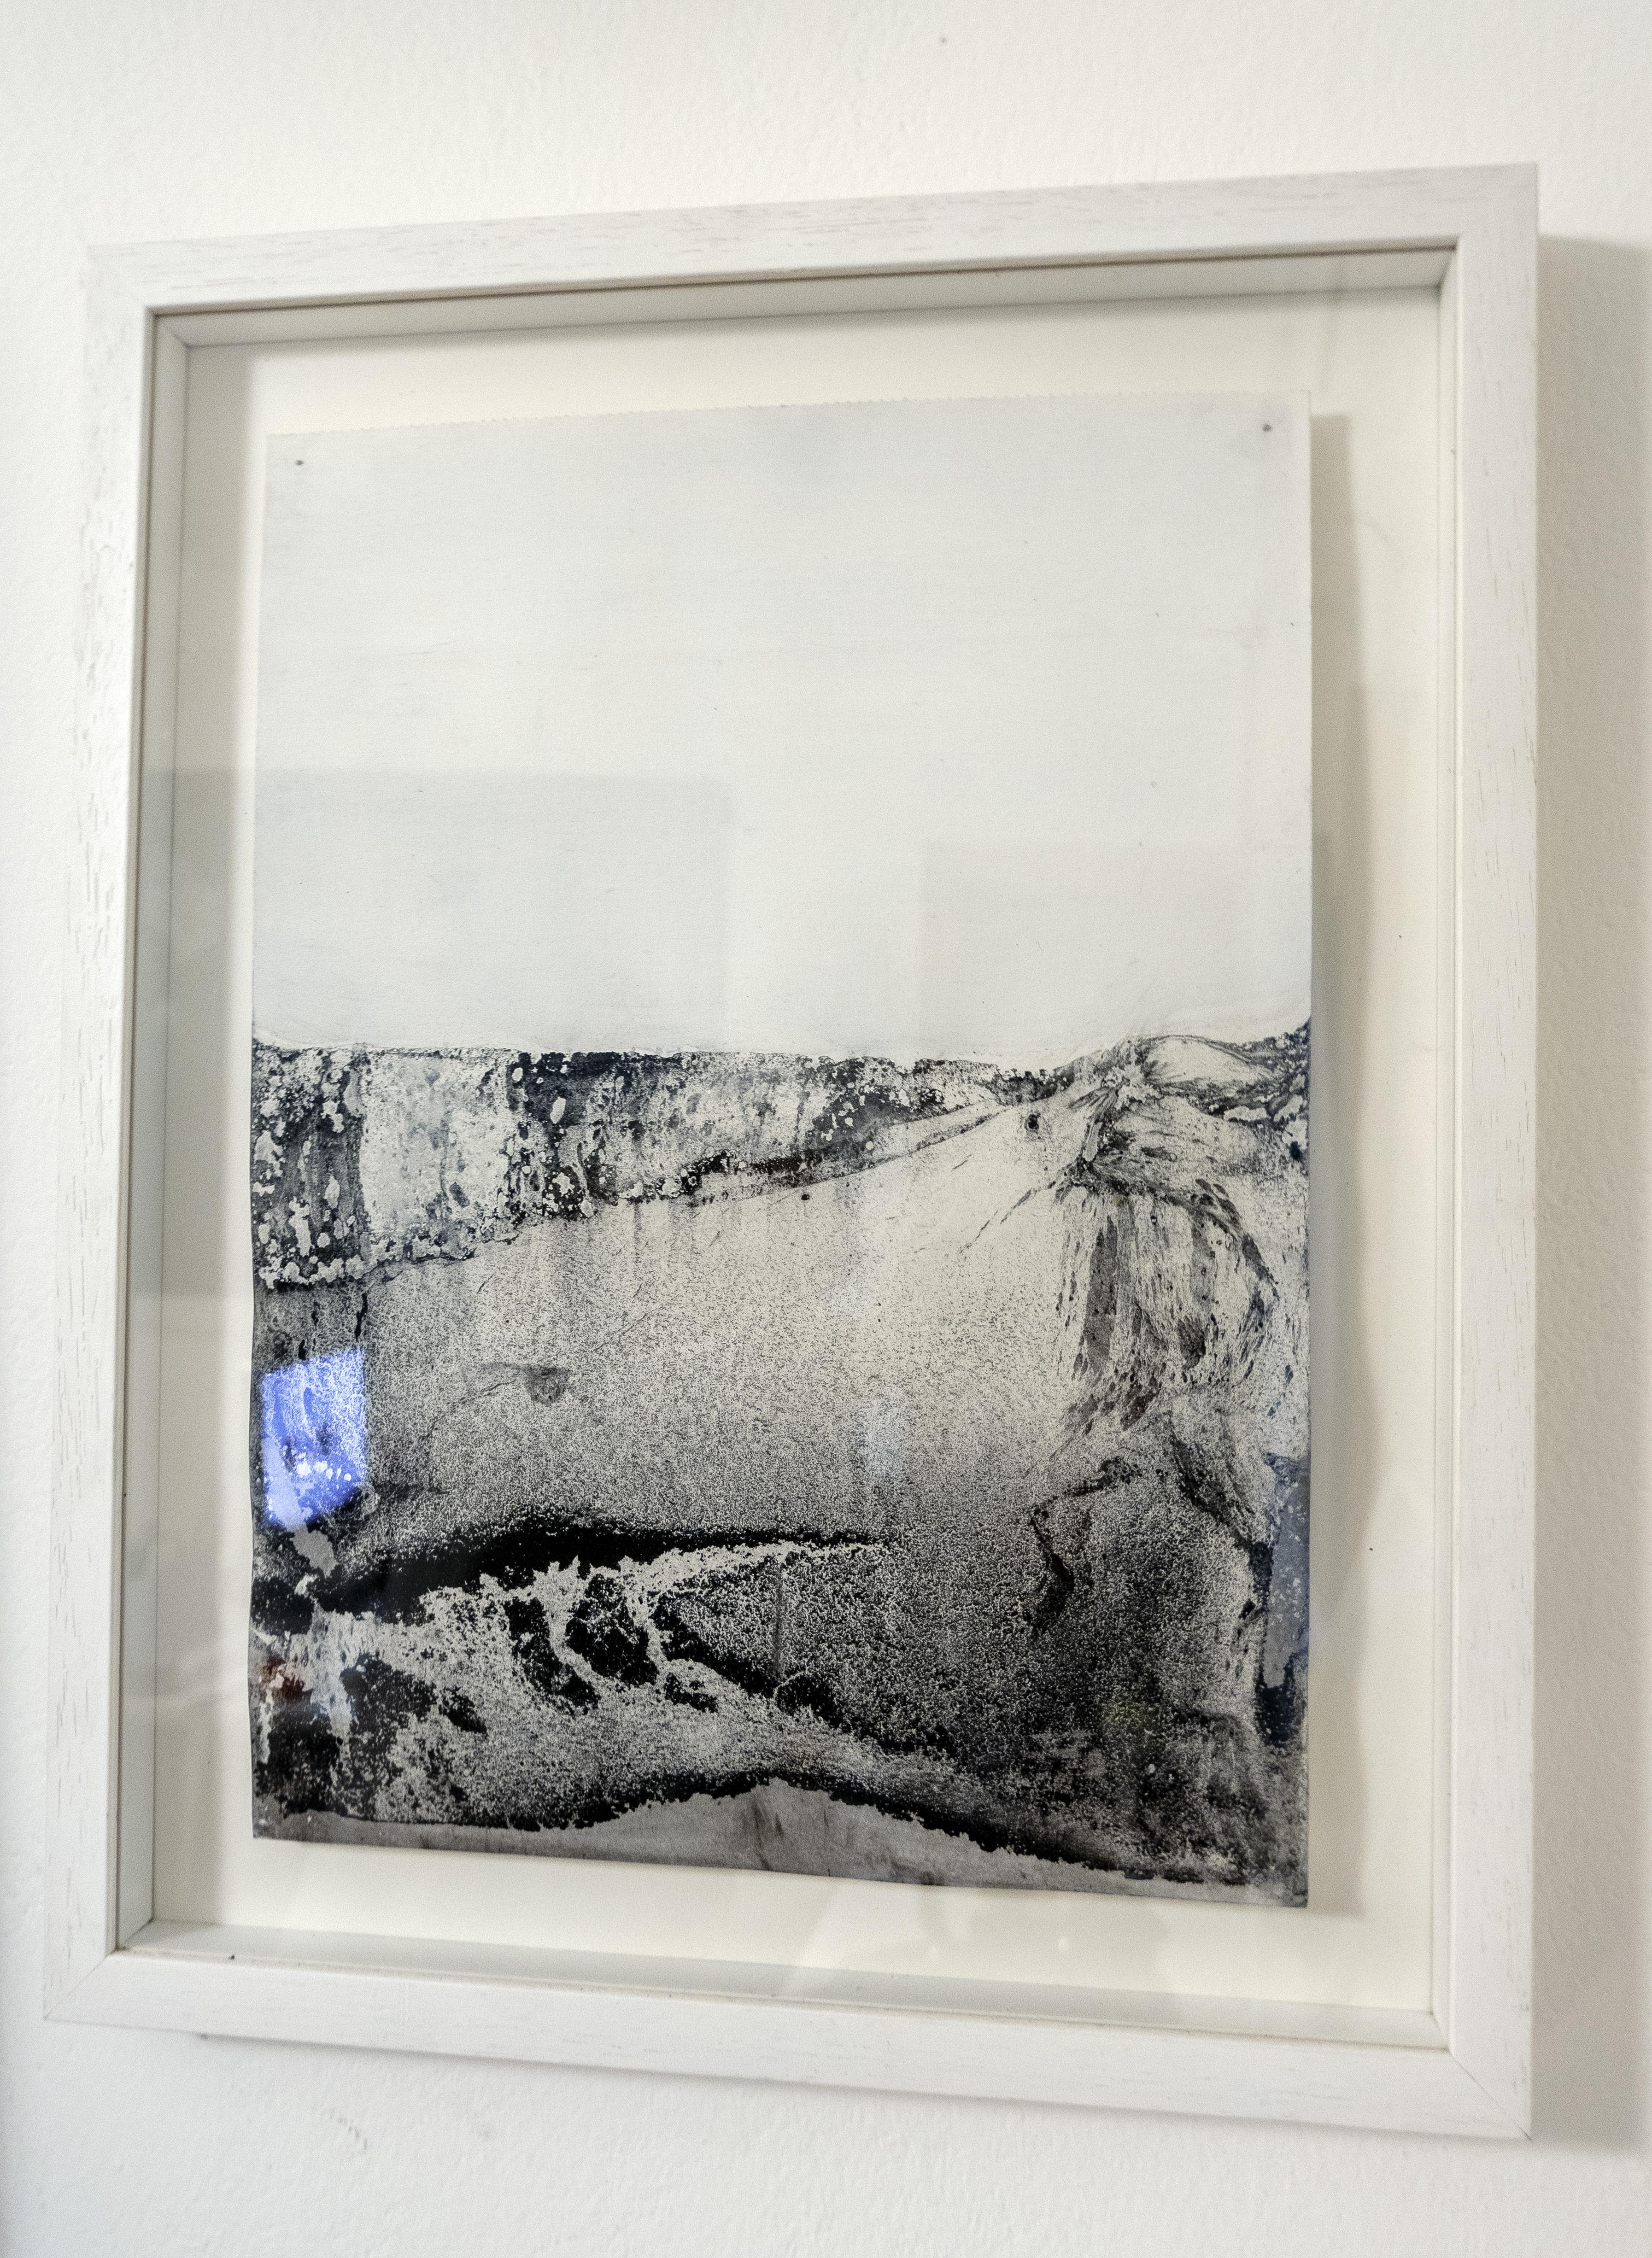 Landscape 
mineral oxide on Paper ( Canson Montaval Paper 300gr)
42x27 cm 
this drawing is sold with white wooden frame as pictured
the total size with frame
50x40x3 cm
Original Art 
Made in Italy